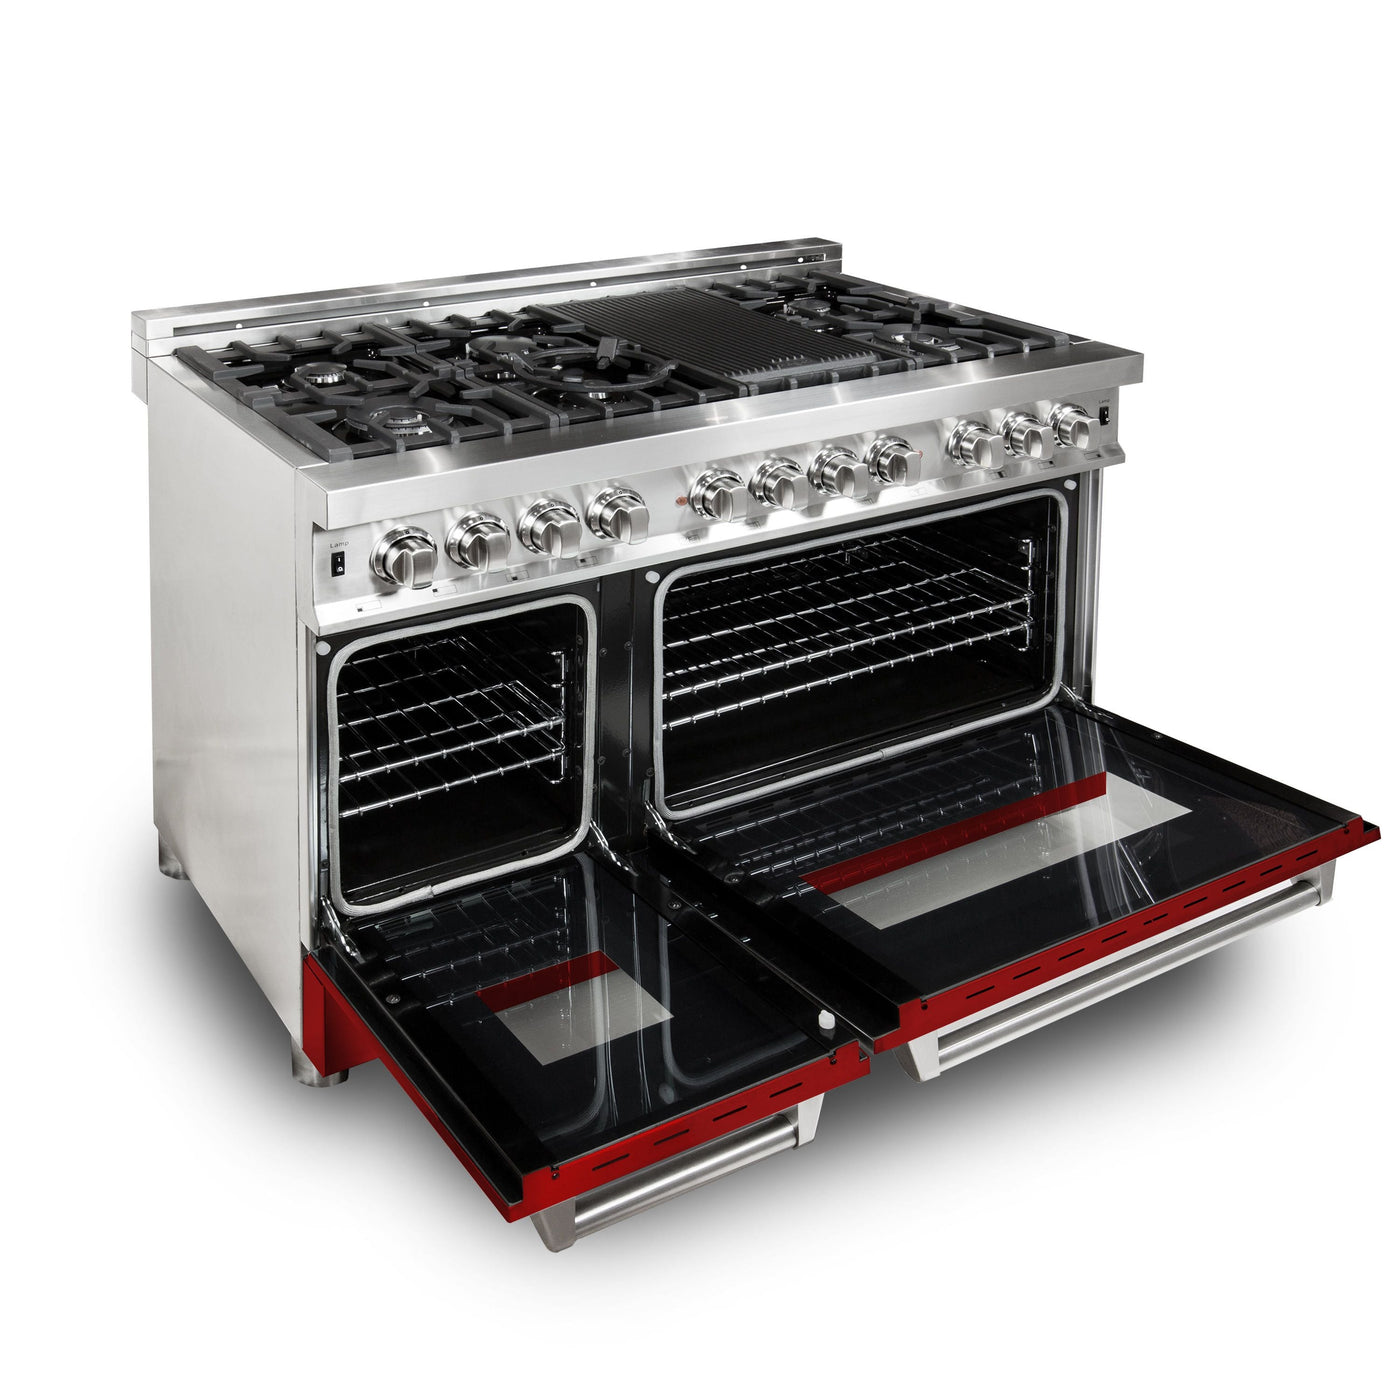 ZLINE 48" Kitchen Package with Stainless Steel Dual Fuel Range with Red Gloss Door and Convertible Vent Range Hood